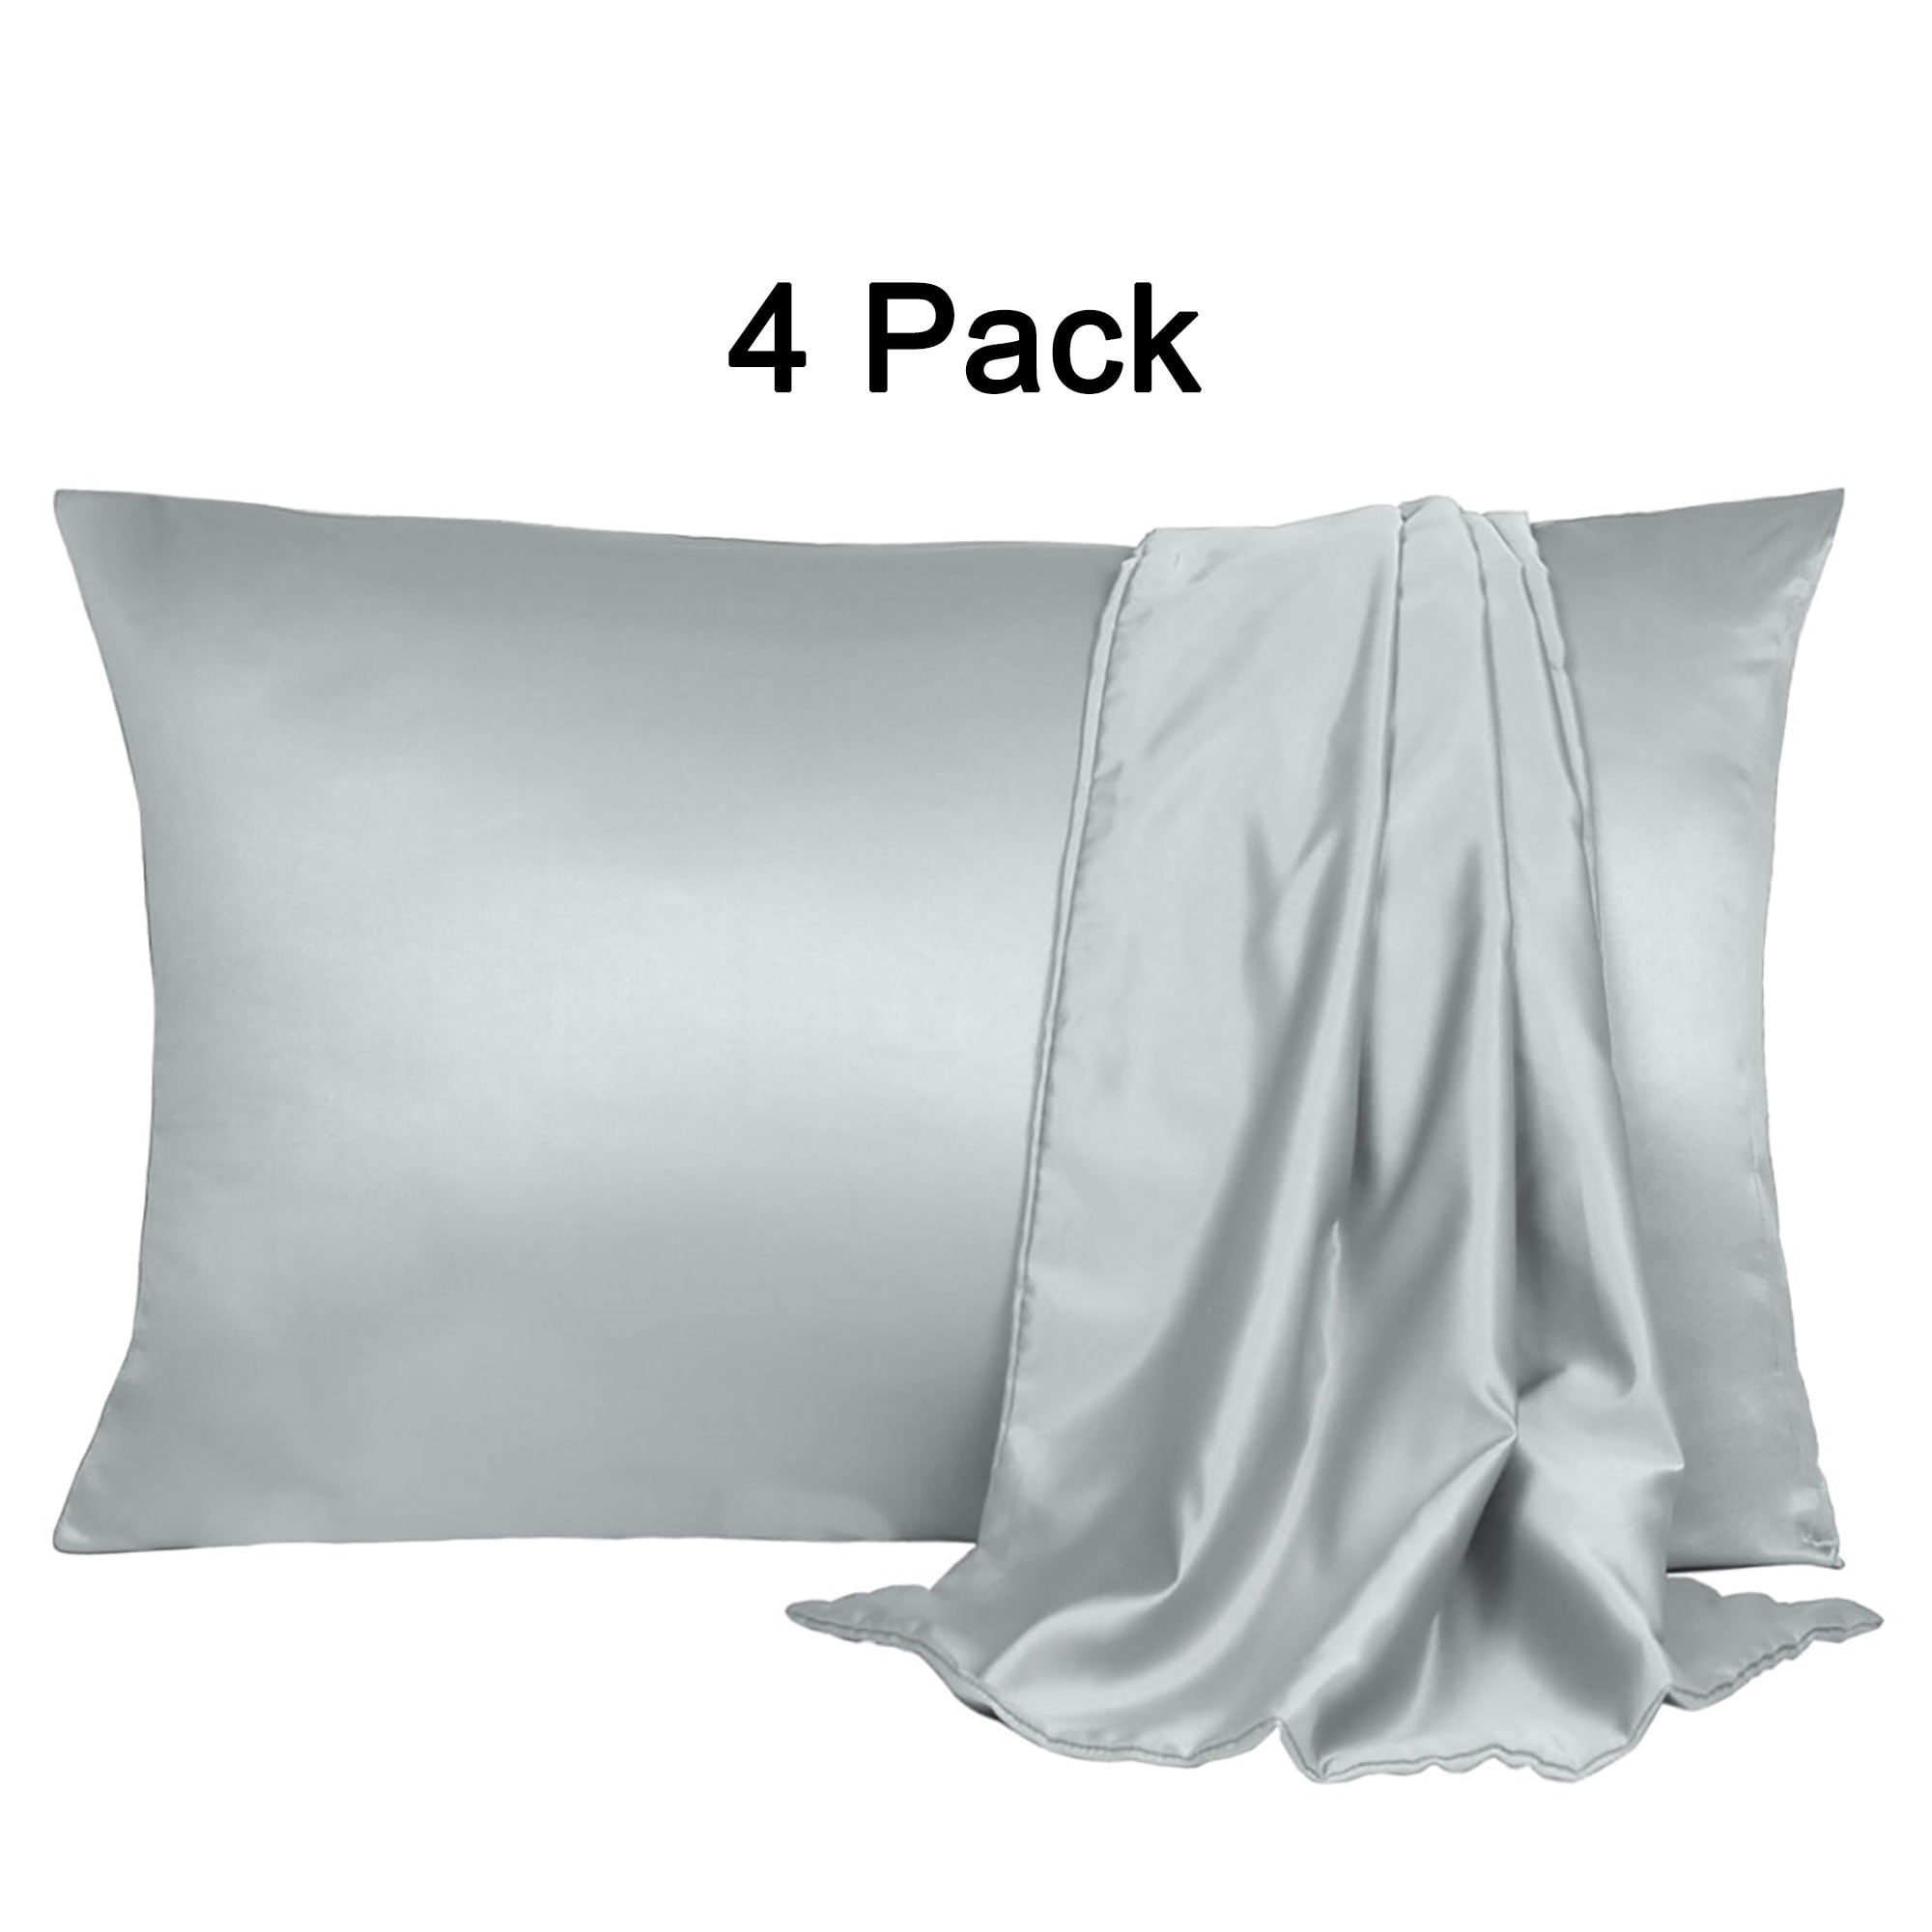 Details about   Cotton Dark Grey Pillowcases LUXURIOUS QUALITY 600 Tc Set of 2 Pillow Cover 